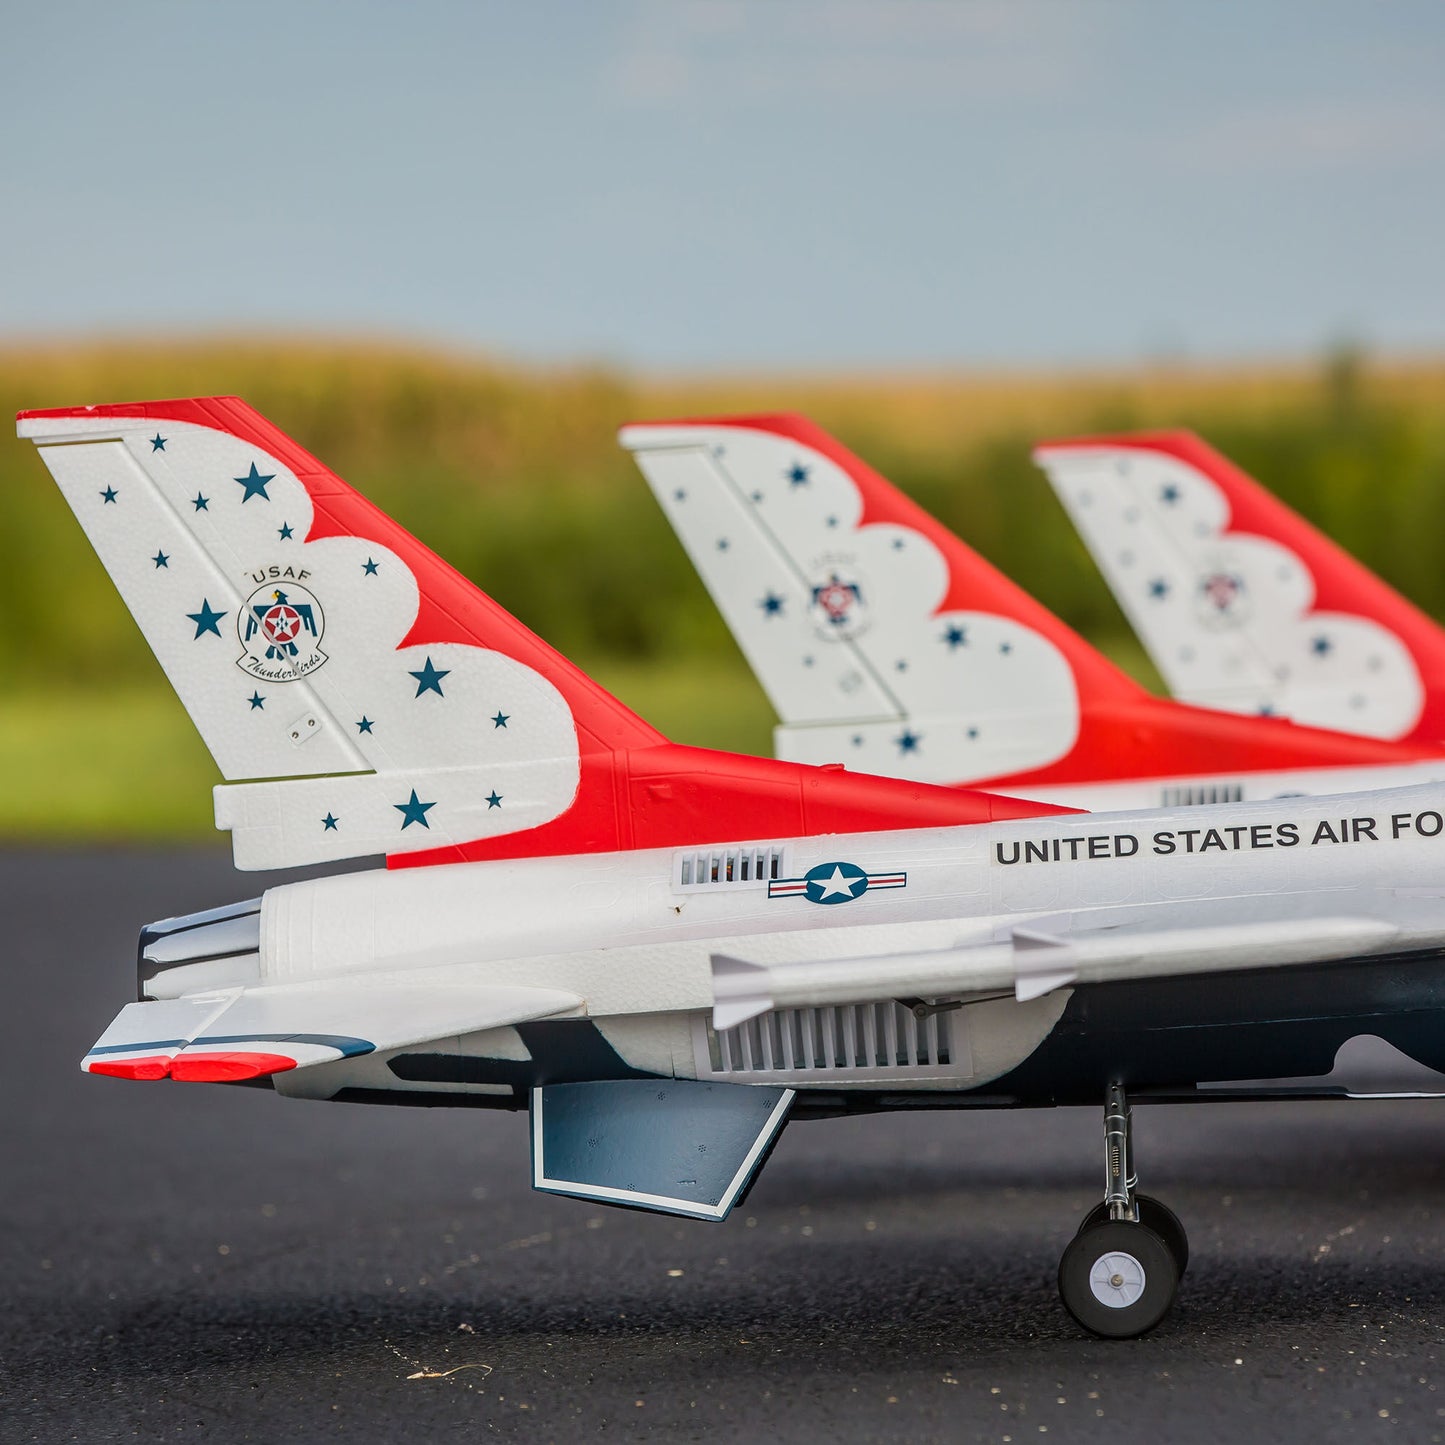 E-Flite F-16 Thunderbirds 70mm EDF Jet BNF Basic with AS3X and SAFE Select